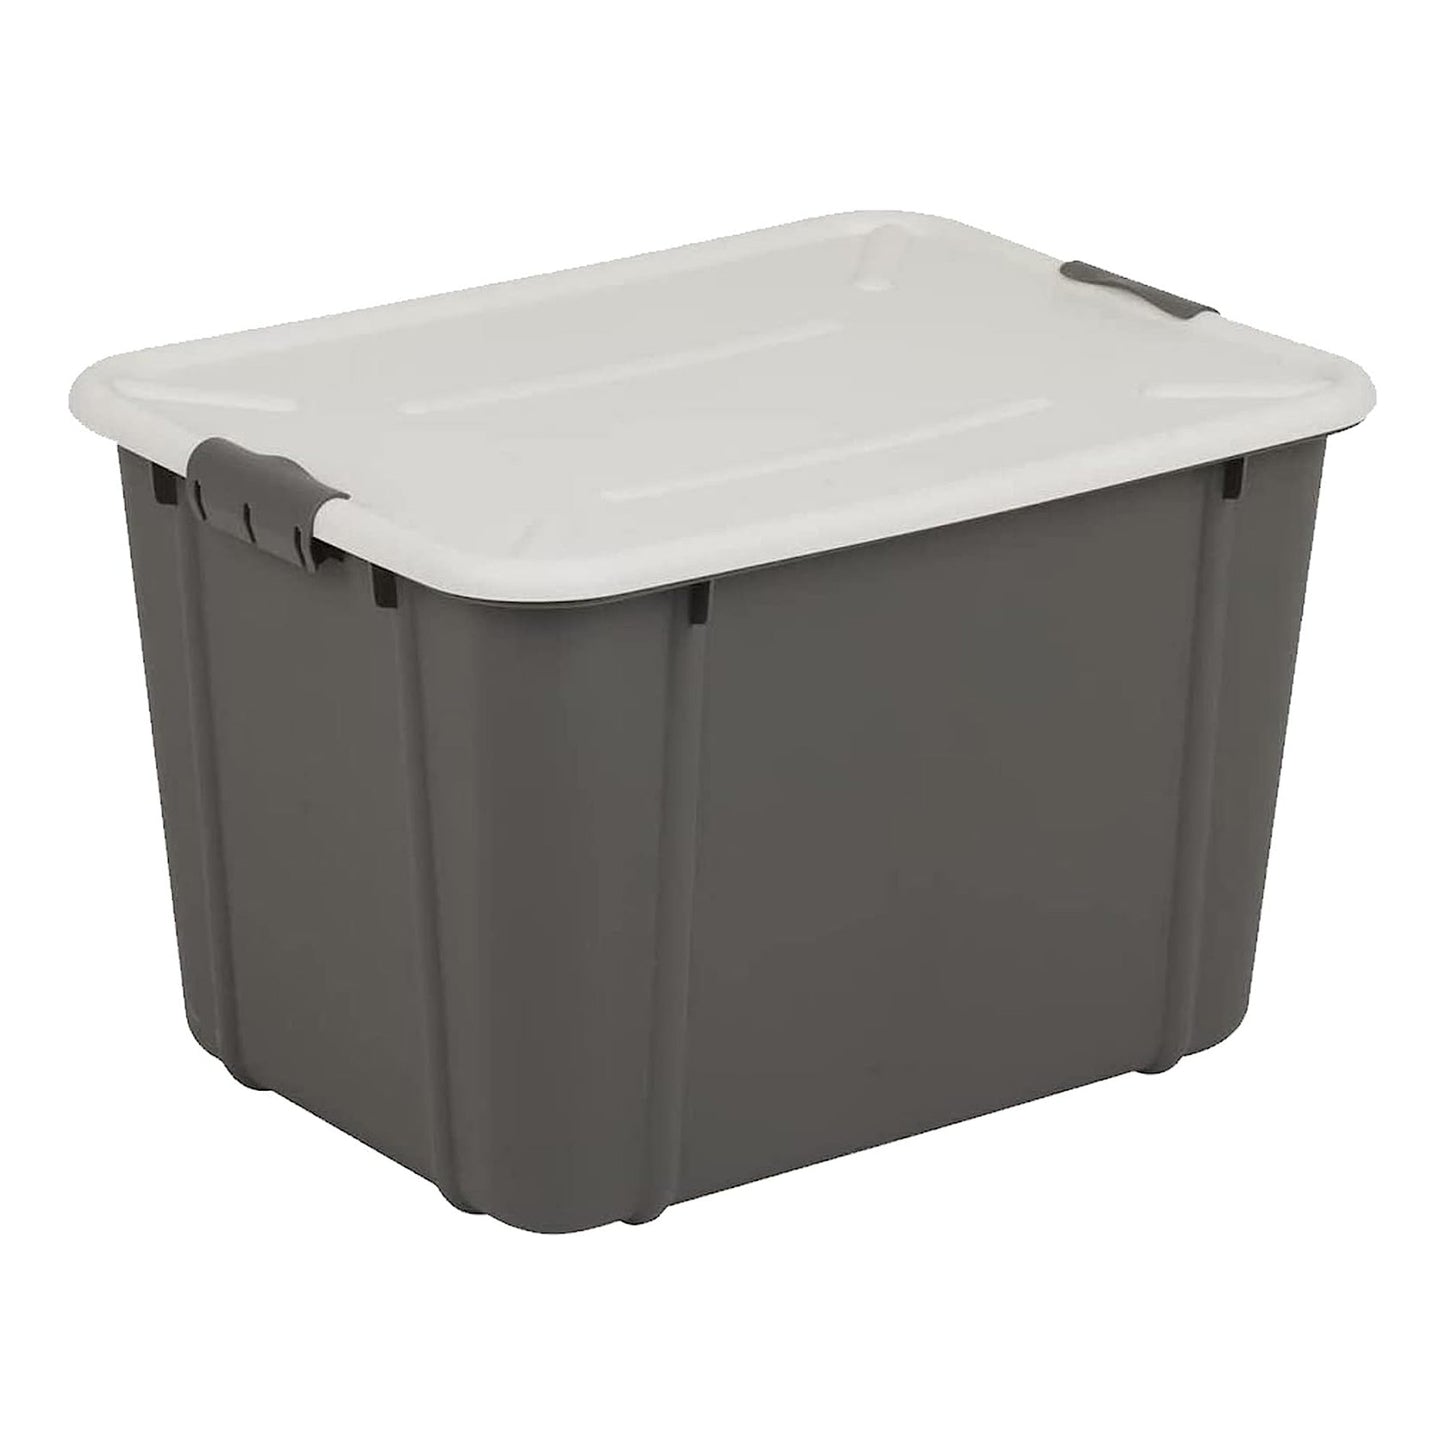 Grey Organic Designed Strong Stackable Spacious Storage Containers With Clip Lock Lids